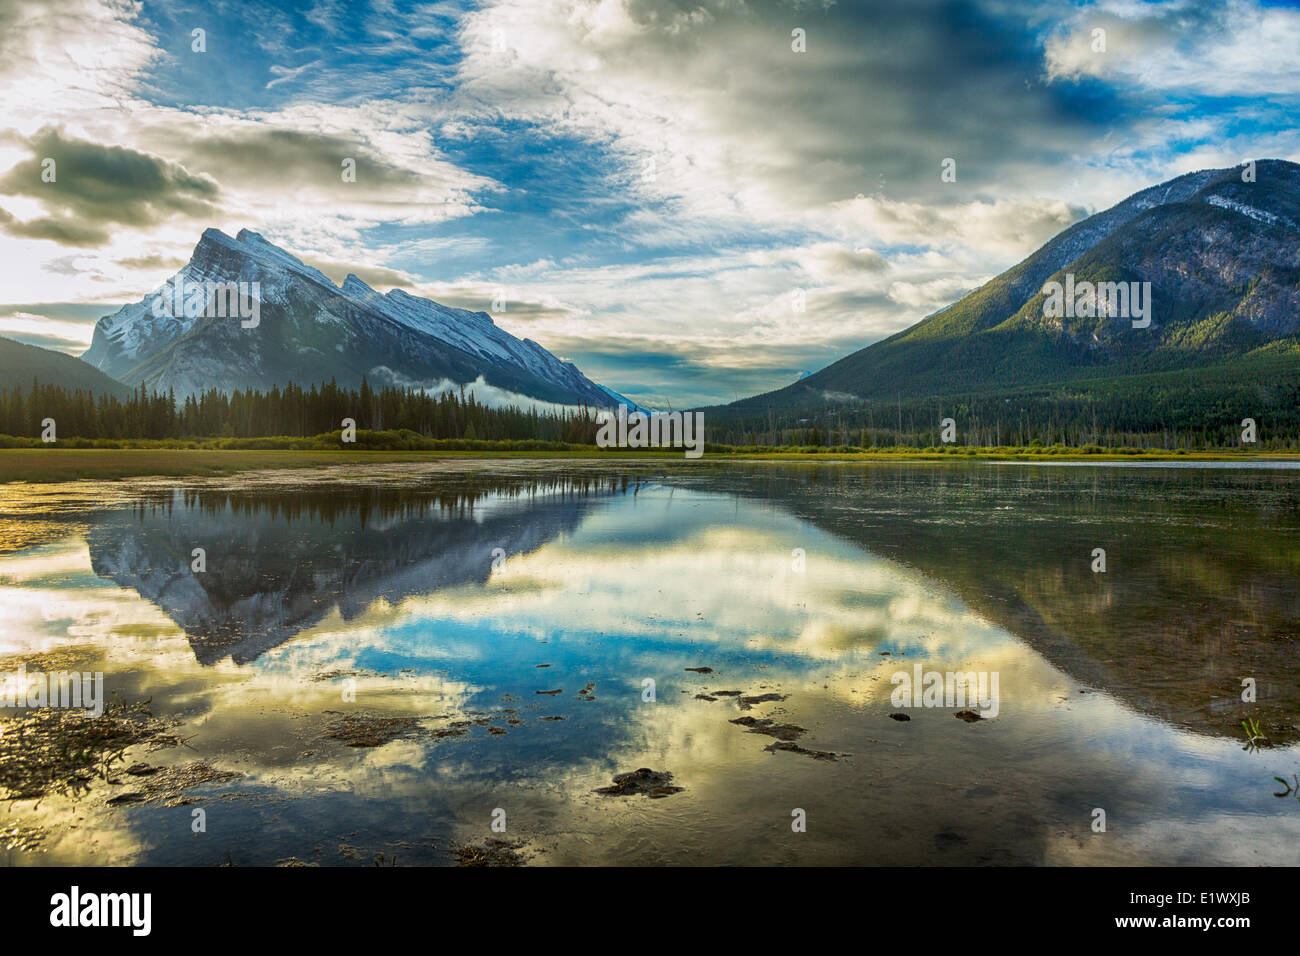 Mount Rundle reflected in Vermilion Lakes, Banff National Park, Alberta, Canada Stock Photo